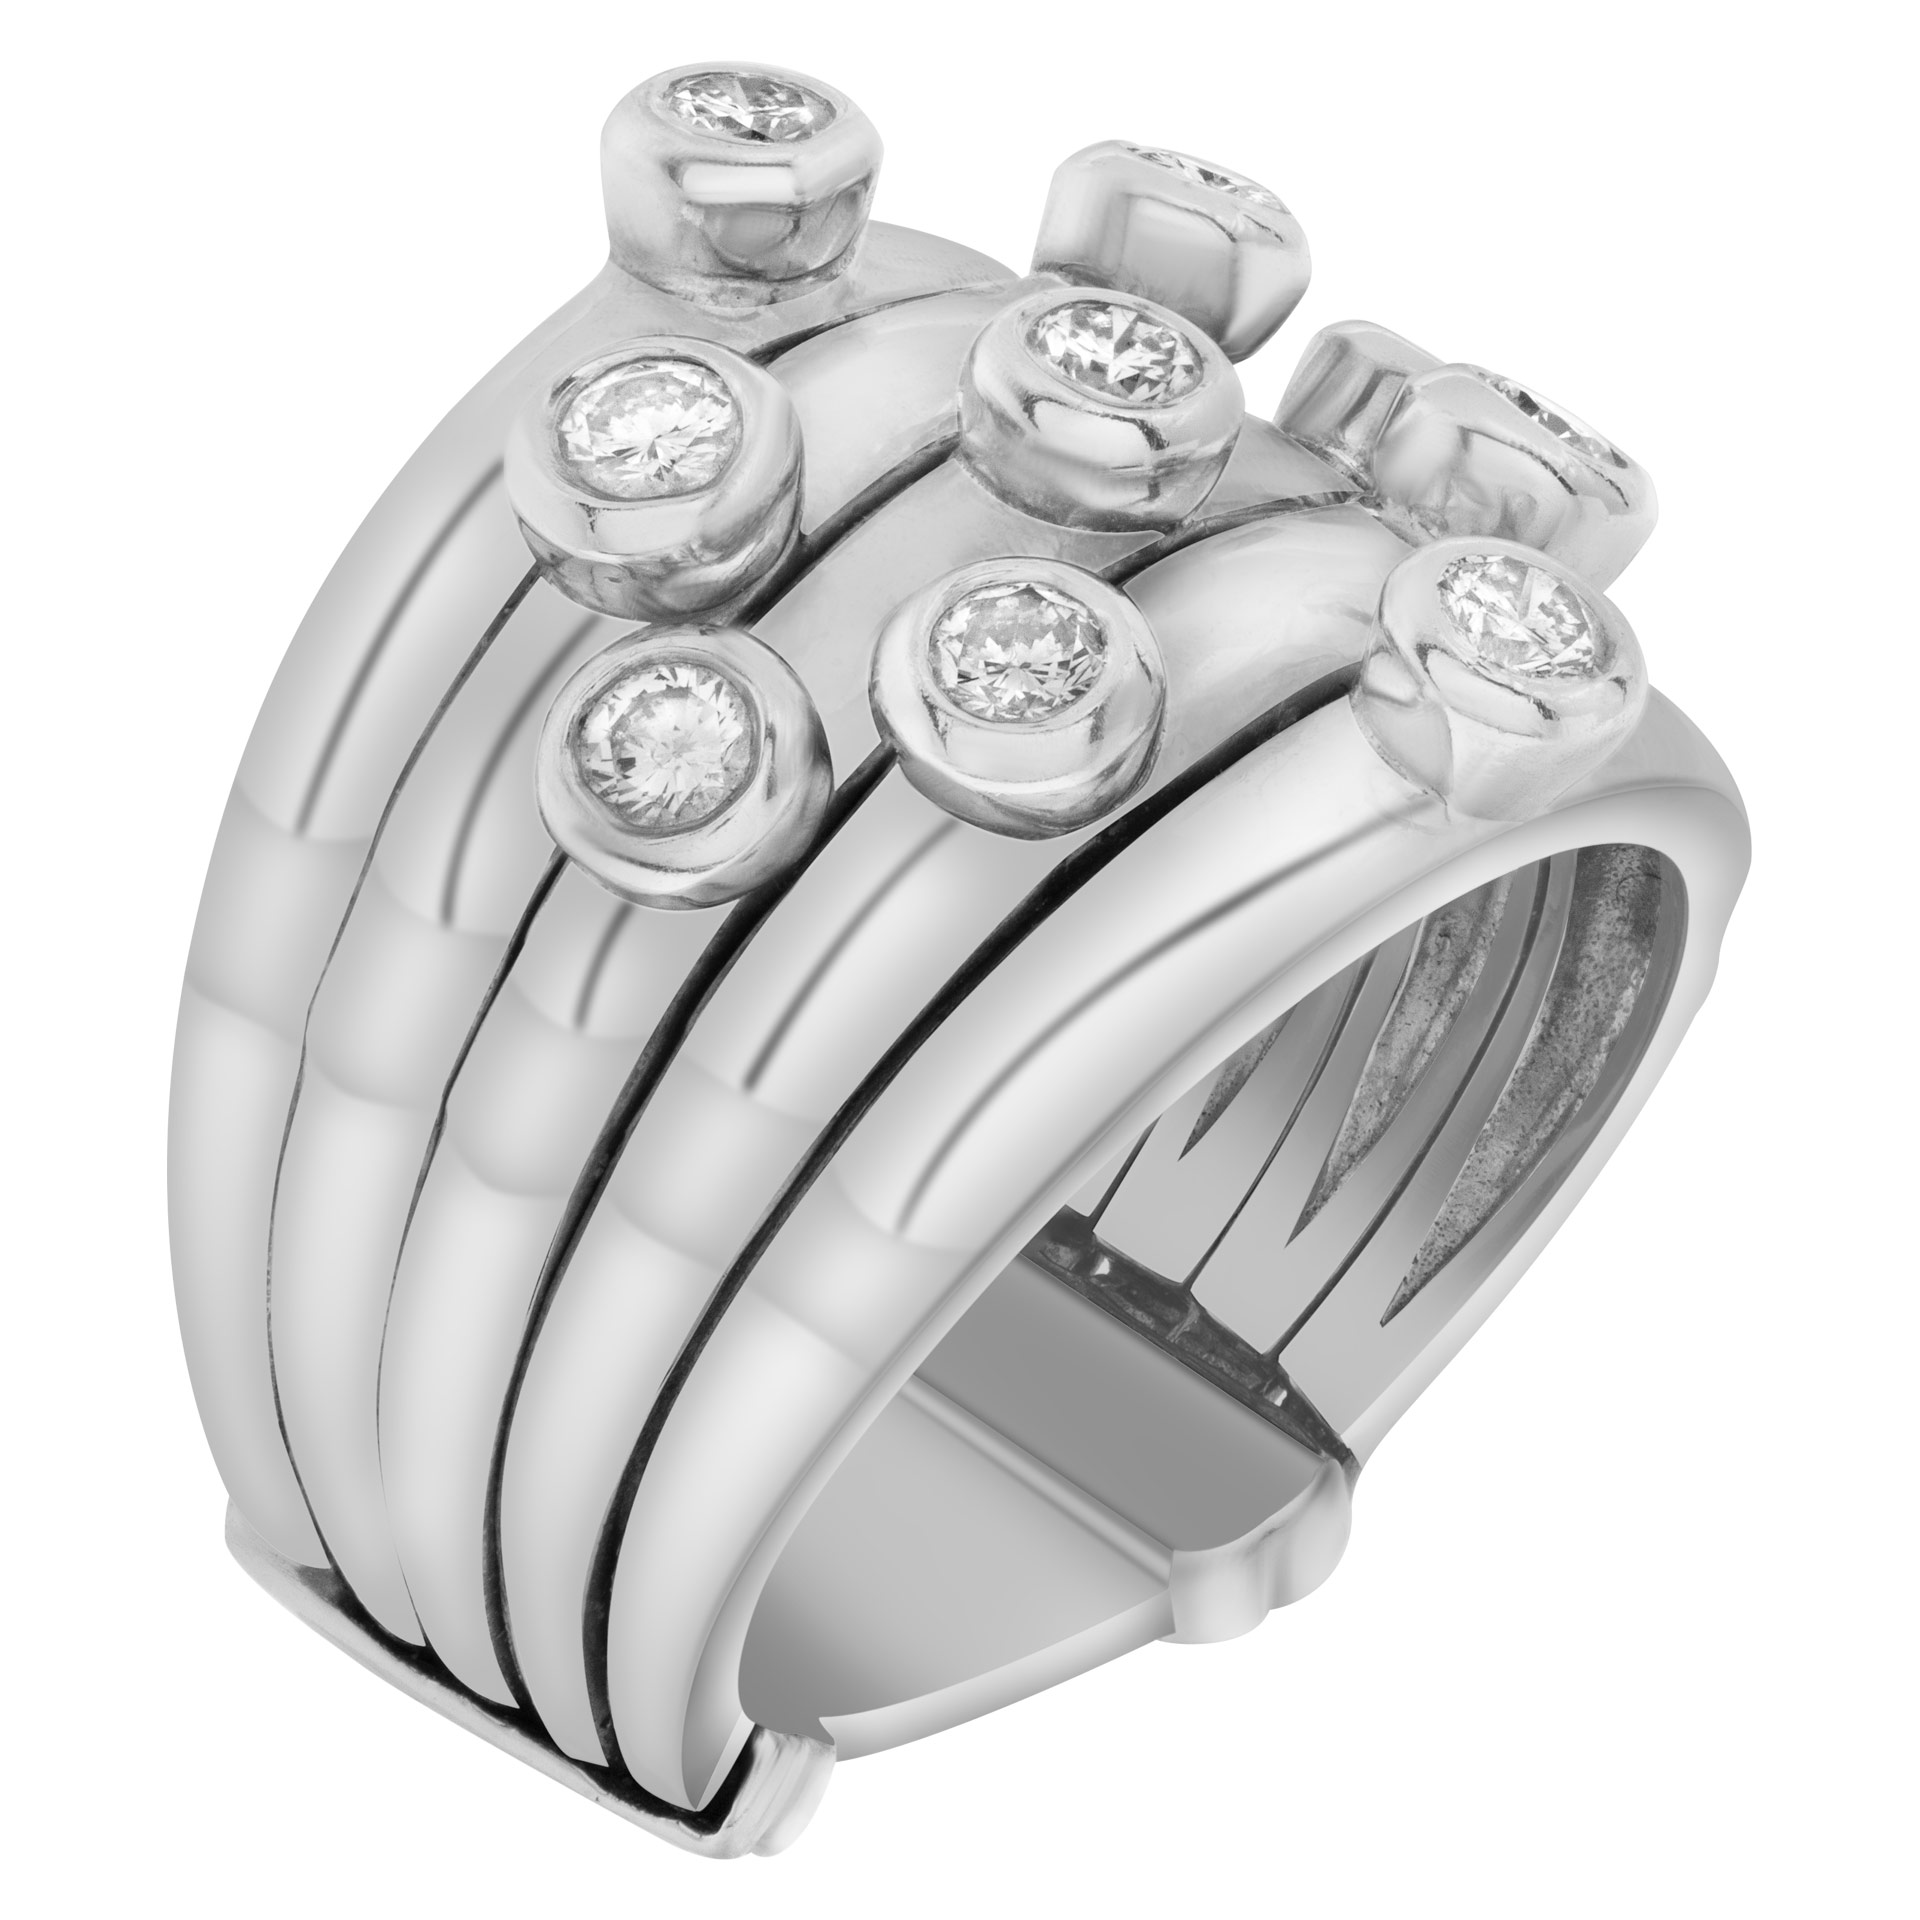 Wide diamonds ring set in 18k white gold. Round brilliant bezeled set diamonds total approx. weight: 1.00 carat image 3